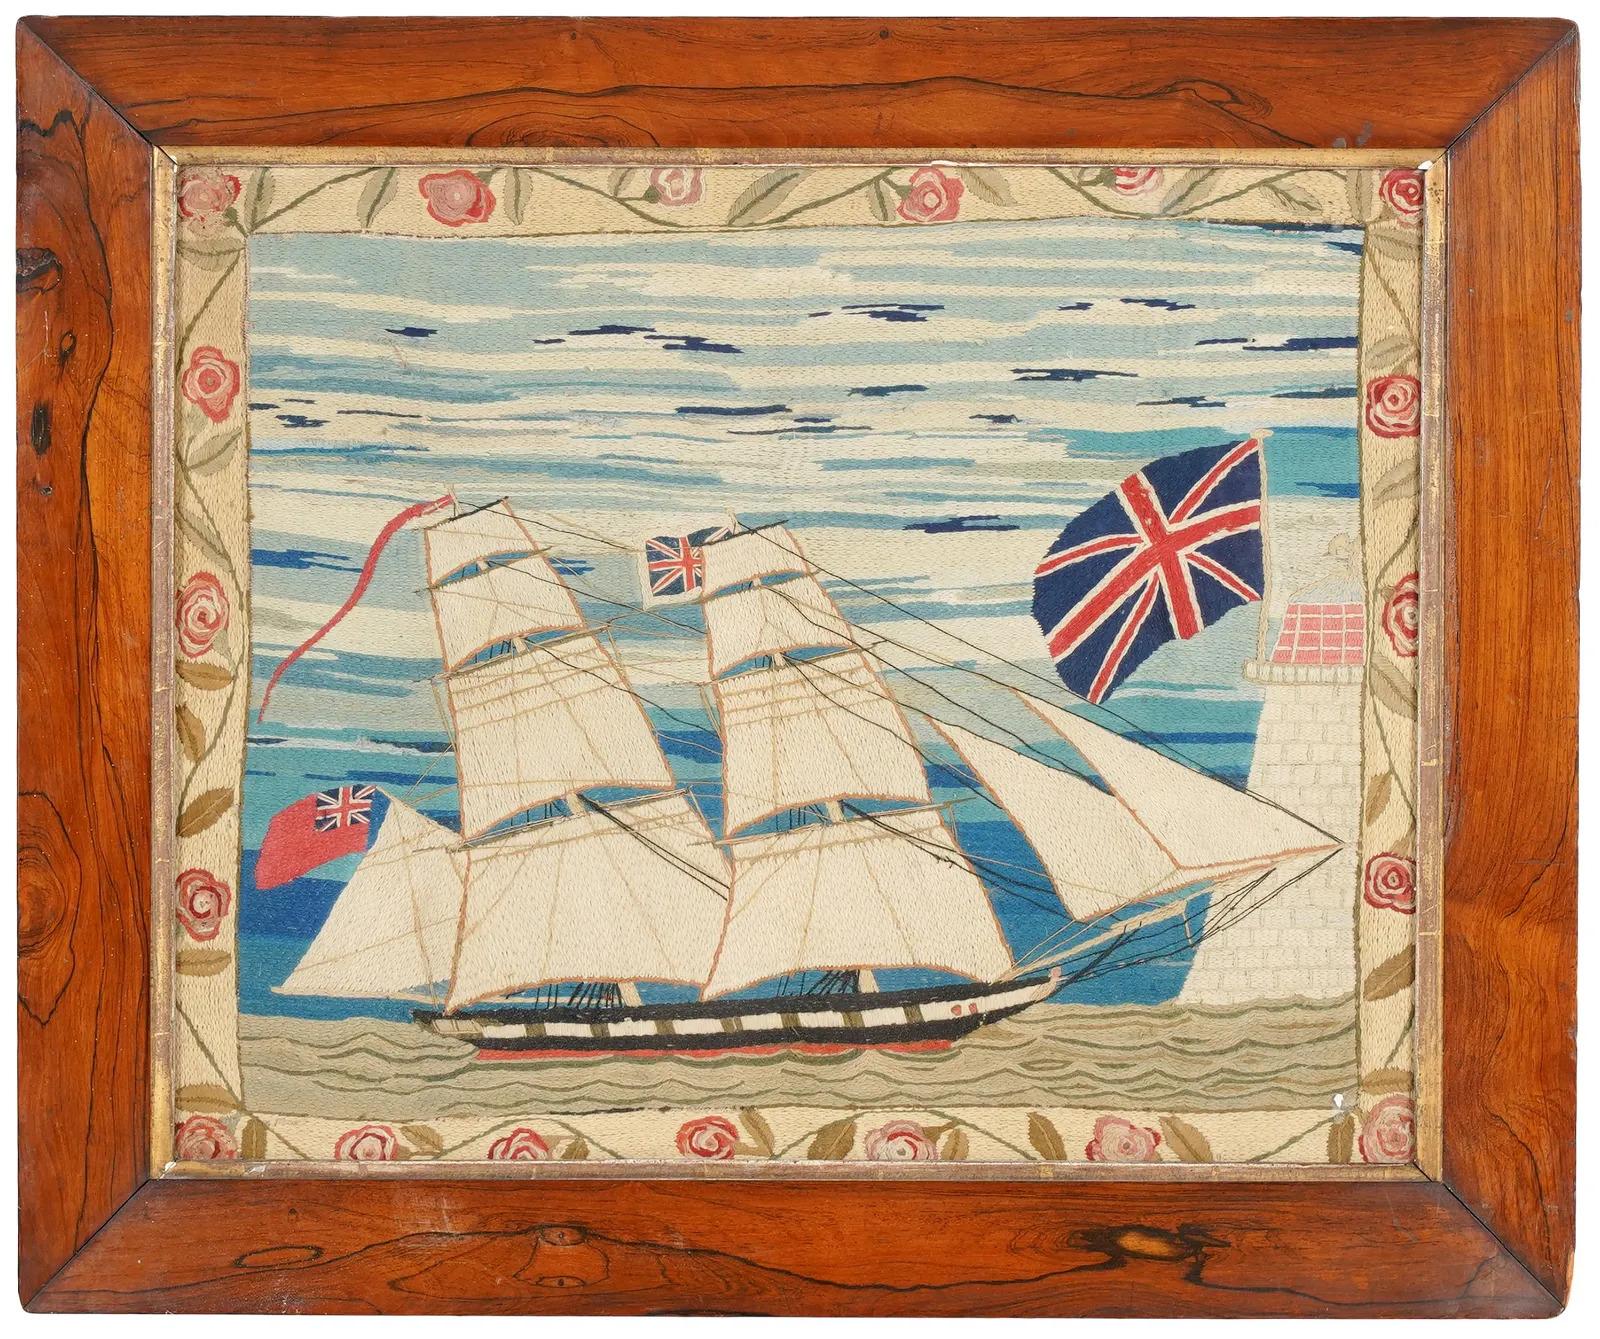 British sailor's woolwork with unusual border,
Chain stitch,
Circa 1875
 
The unusually designed charming sailor's woolie depicts a starboard side view of a British two-masted ship entering a harbor with a fort flying a large Union Jack in an